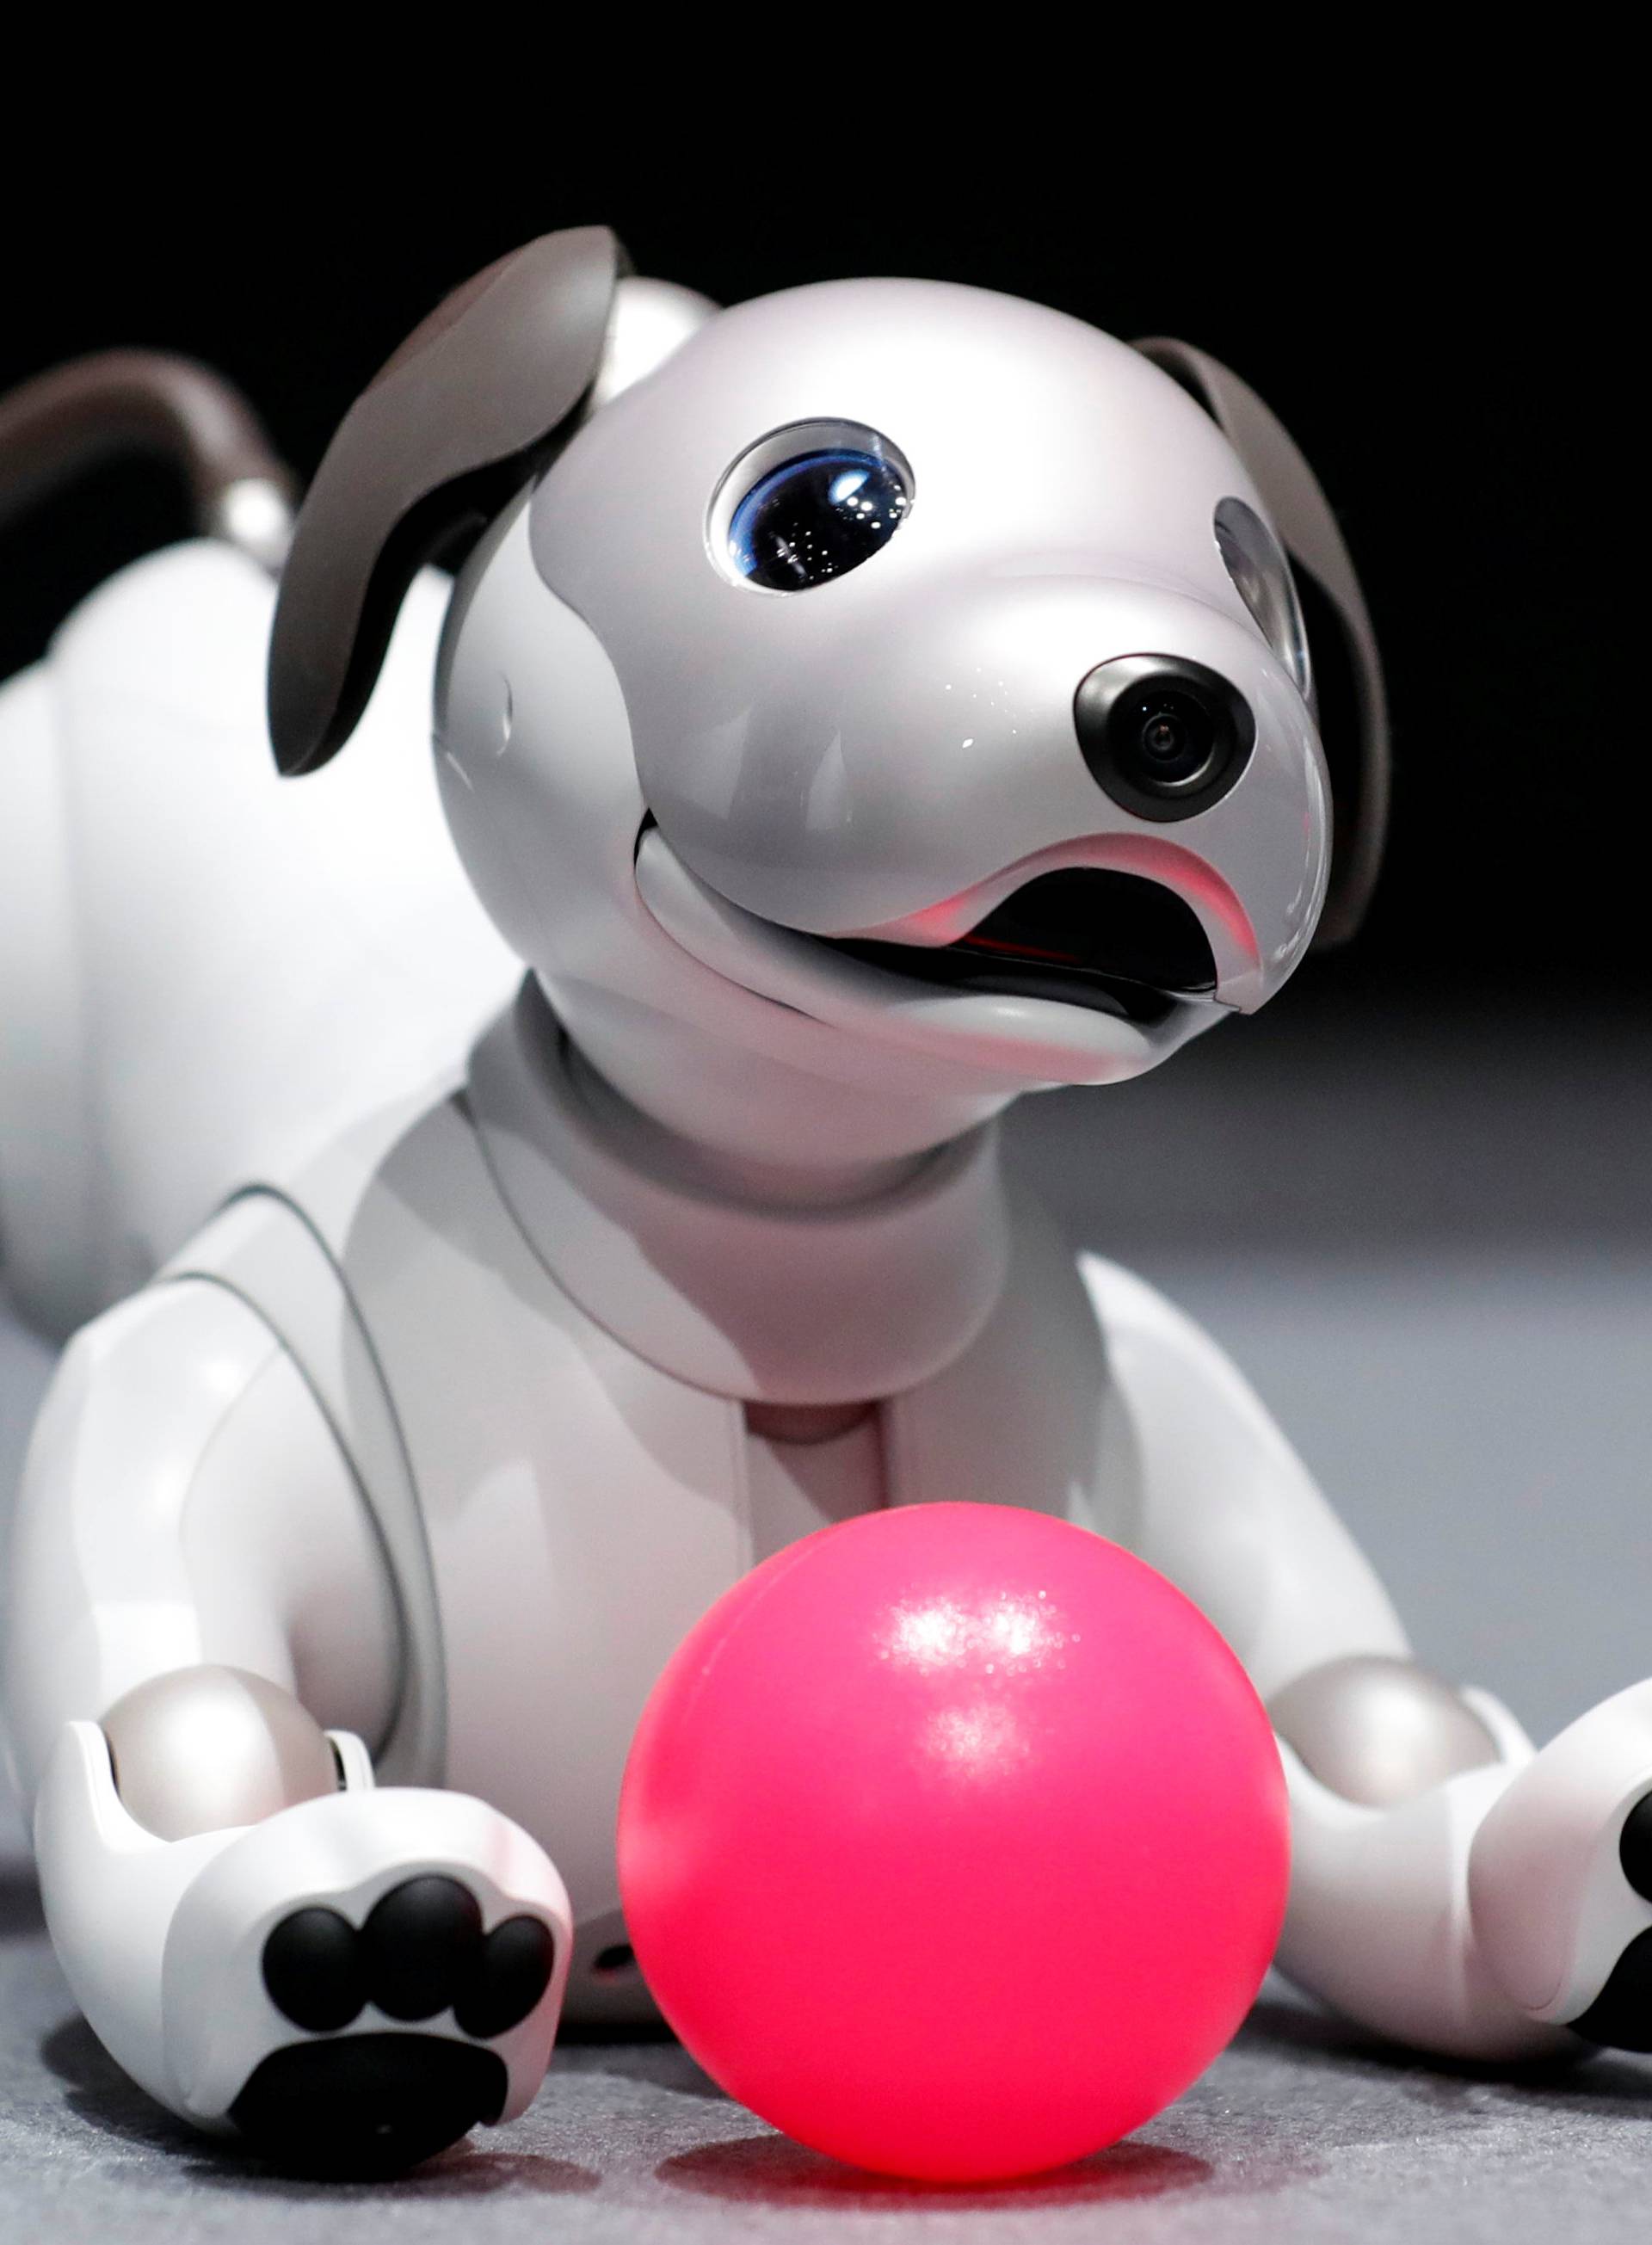 Sony Corp's entertainment robot "aibo" is pictured at its demonstration in Tokyo